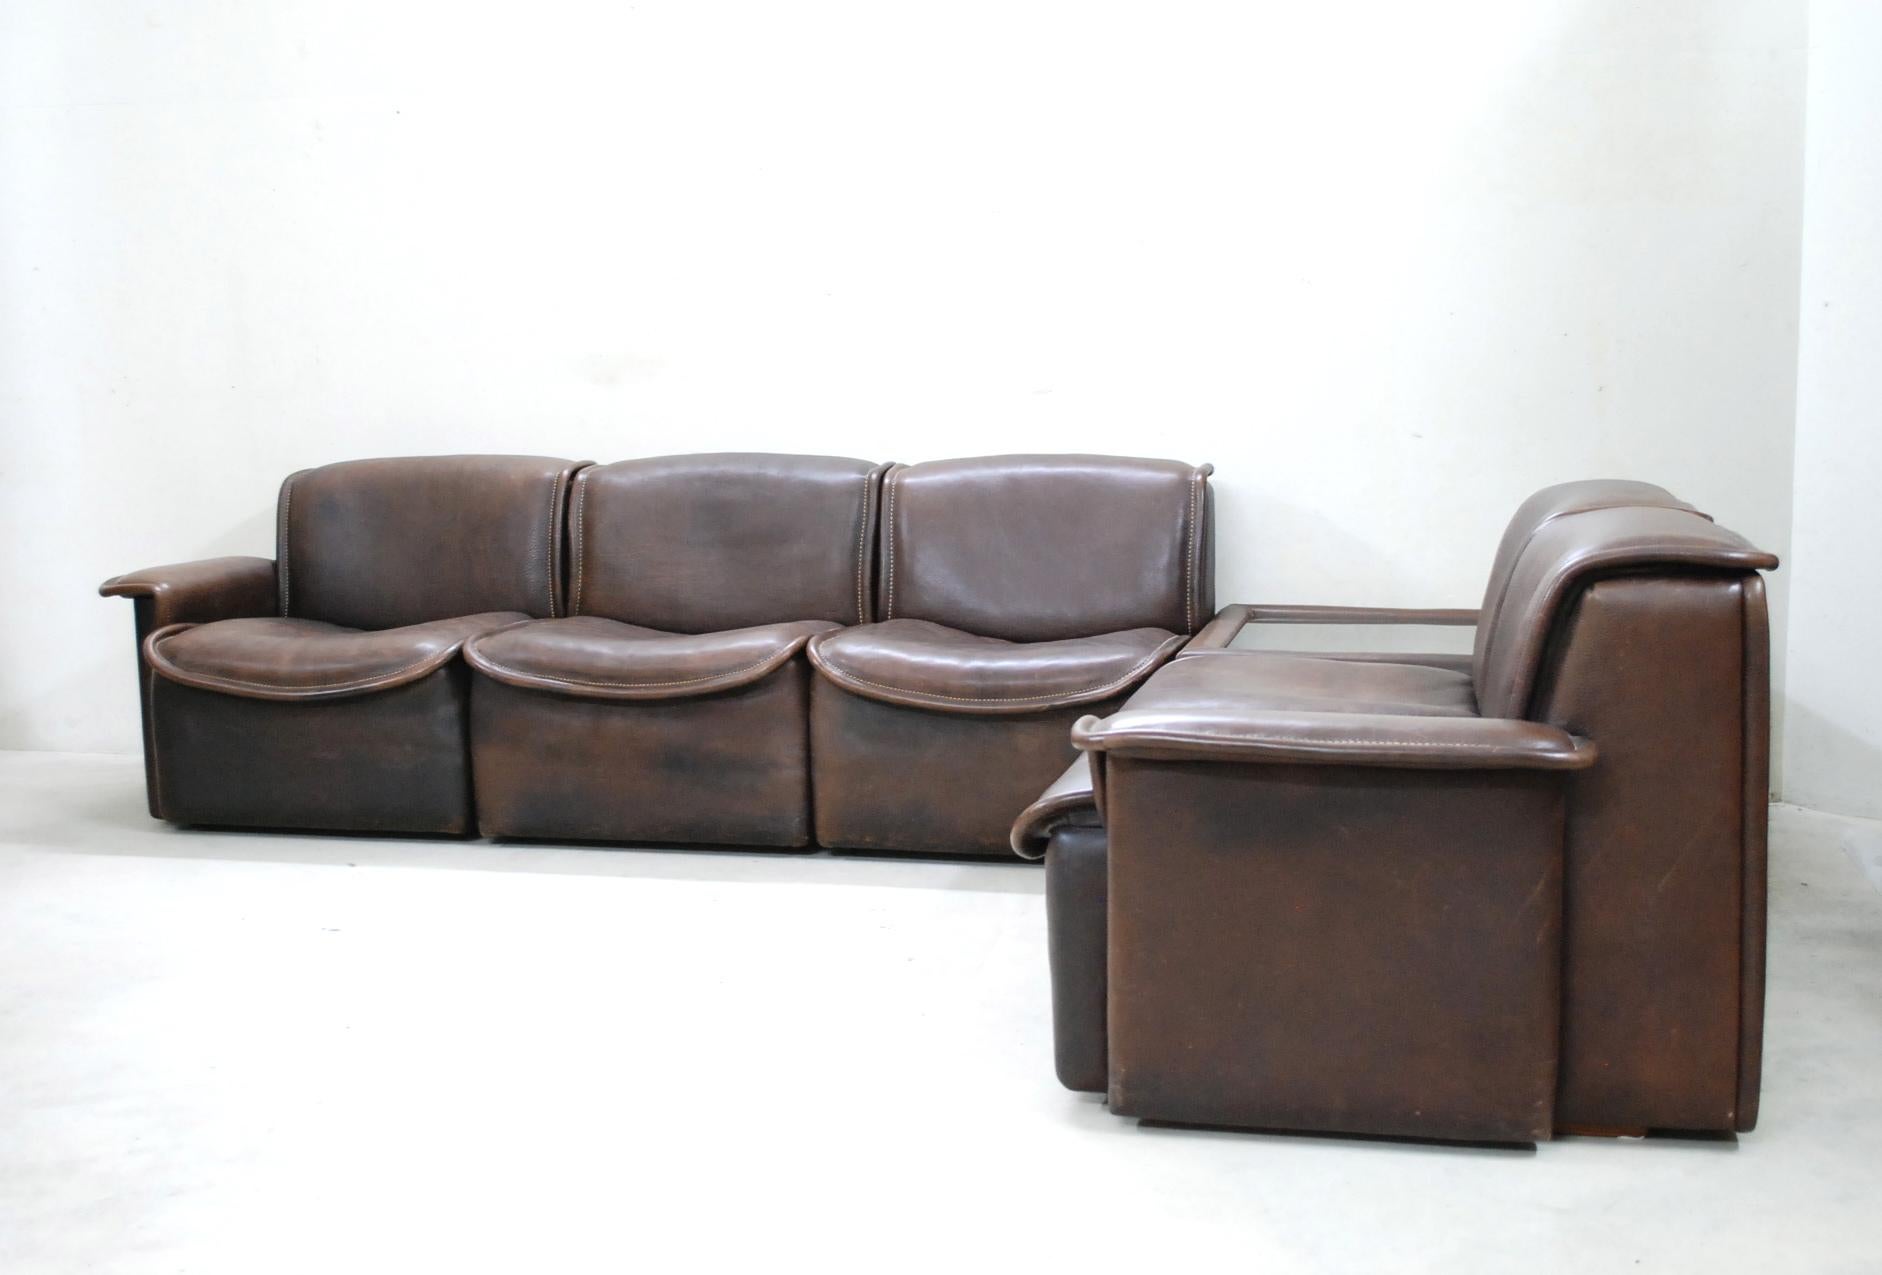 De Sede DS 12 module sofa in brown neck leather.
The leather is very thick and the seam is white.
Vintage condition.
It consists of 5 seating elements including left and right armrests and 1 coffee table with smoked glass top.
It can be